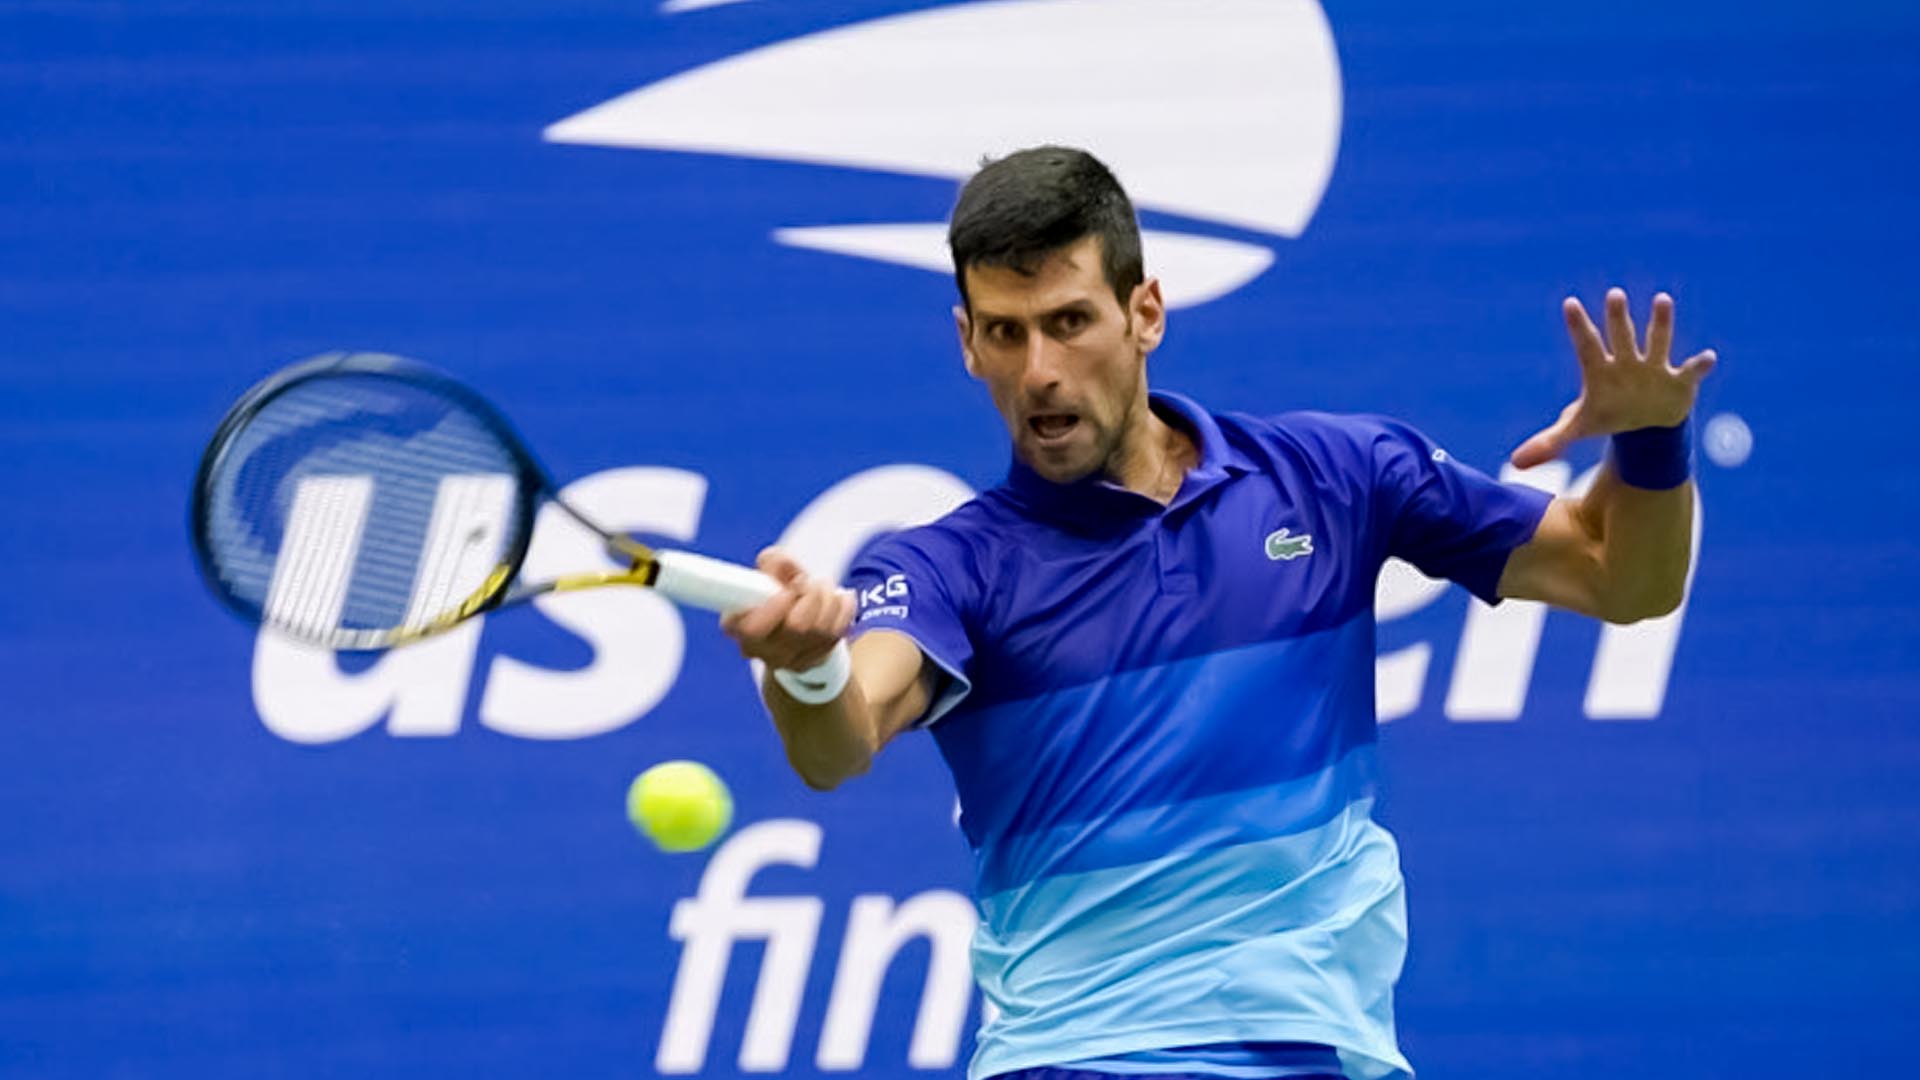 Djokovic cannot compete at the US Open due to his unvaccinated status